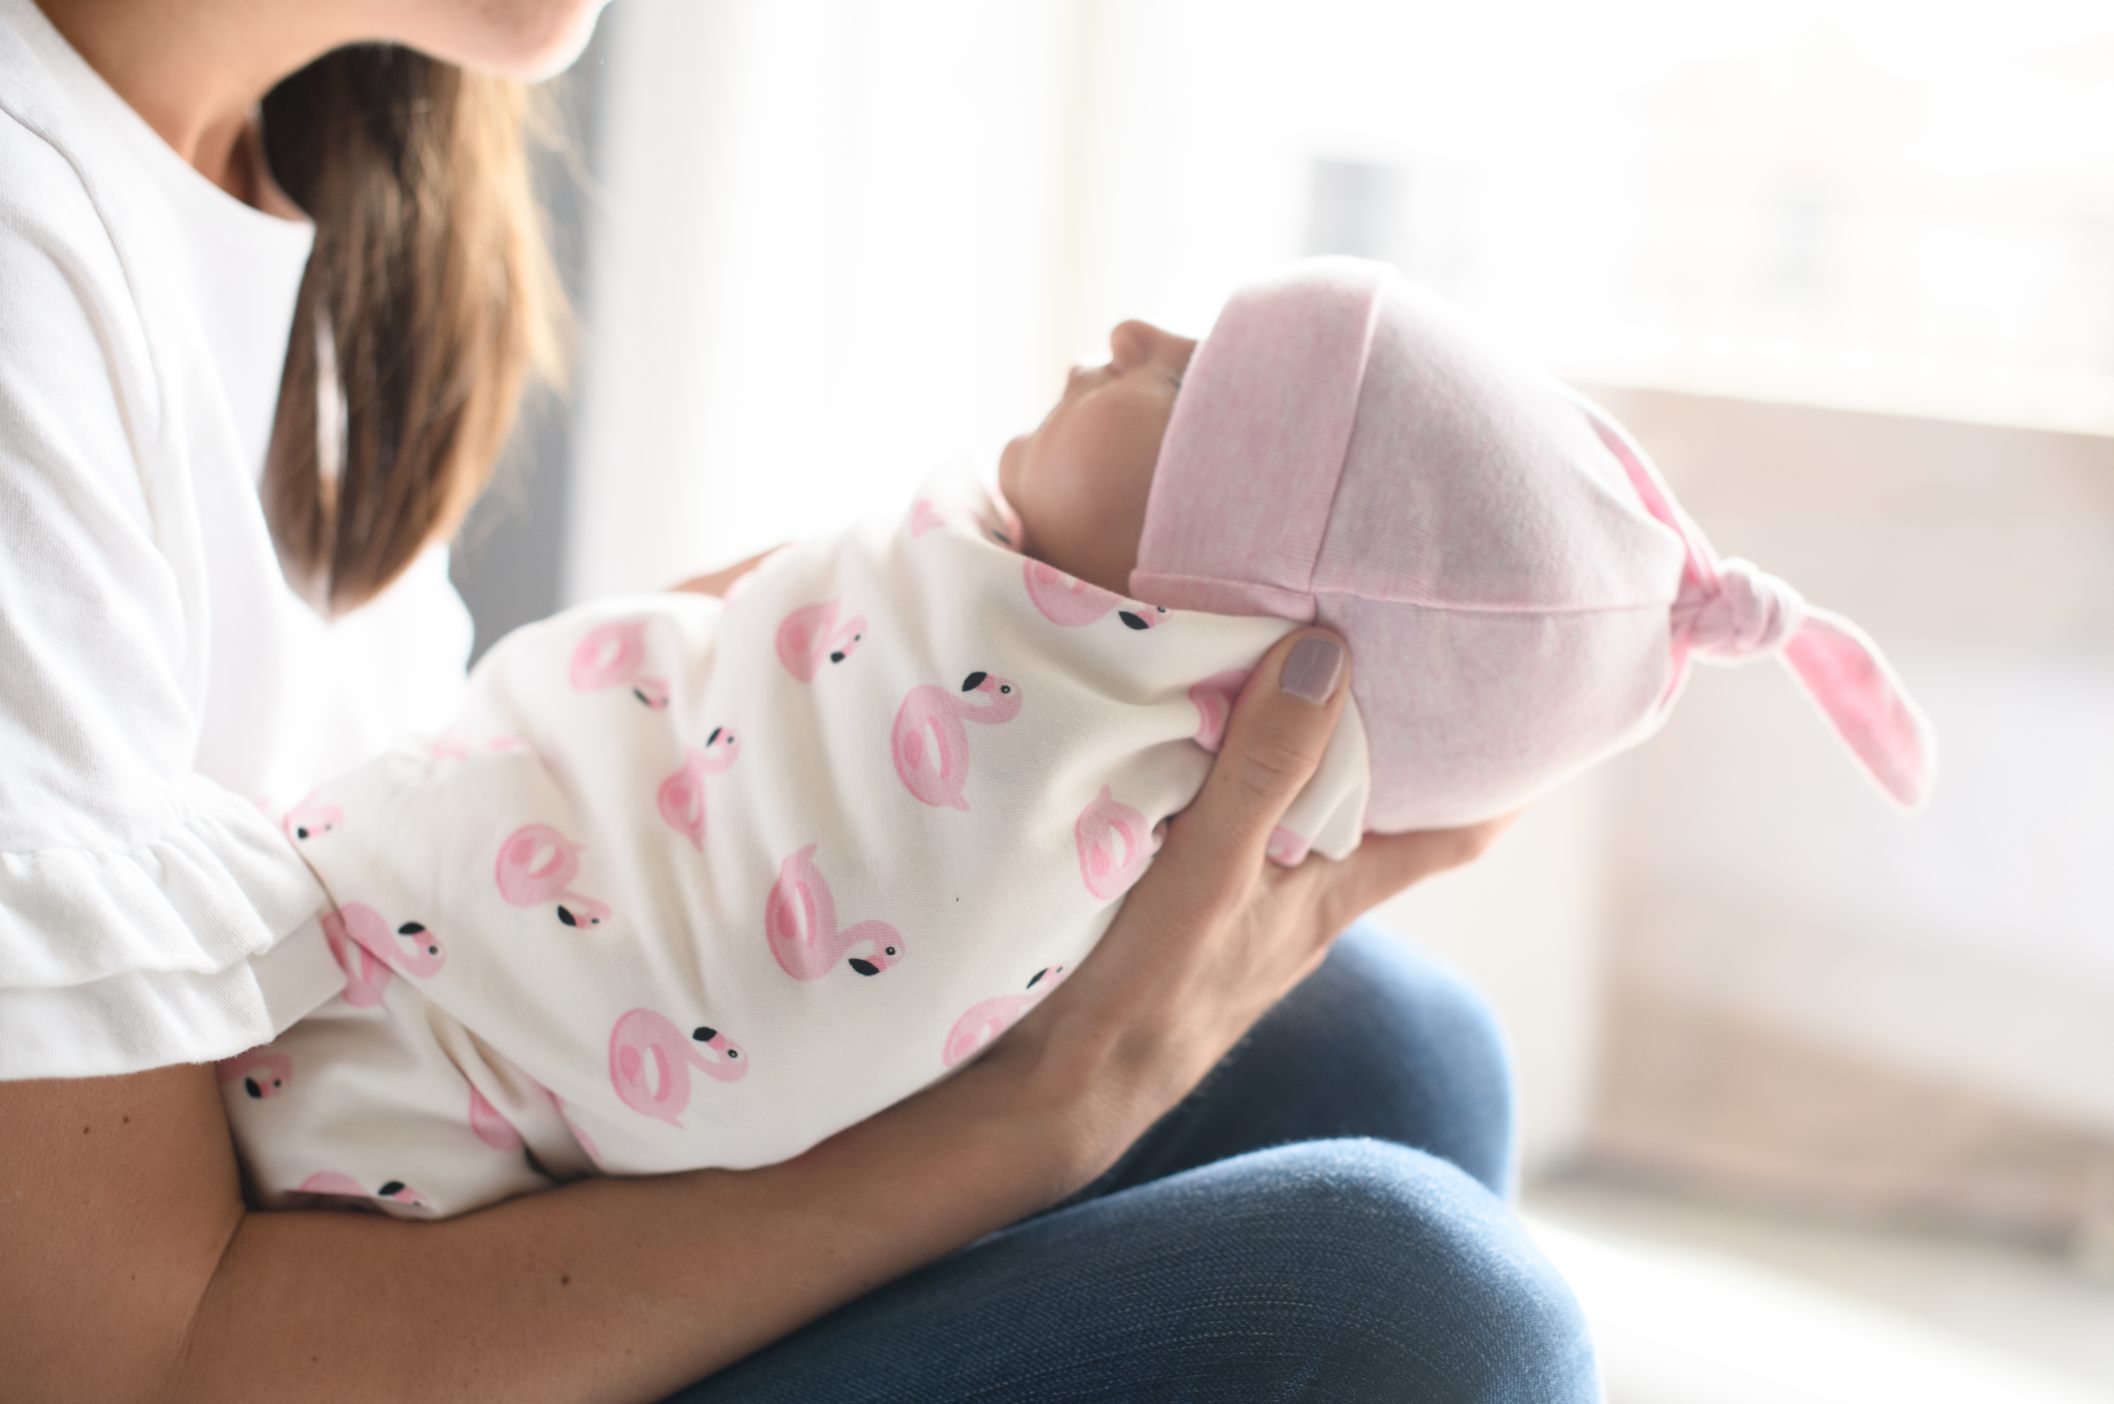 7 Tips for Caring For a Newborn During COVID